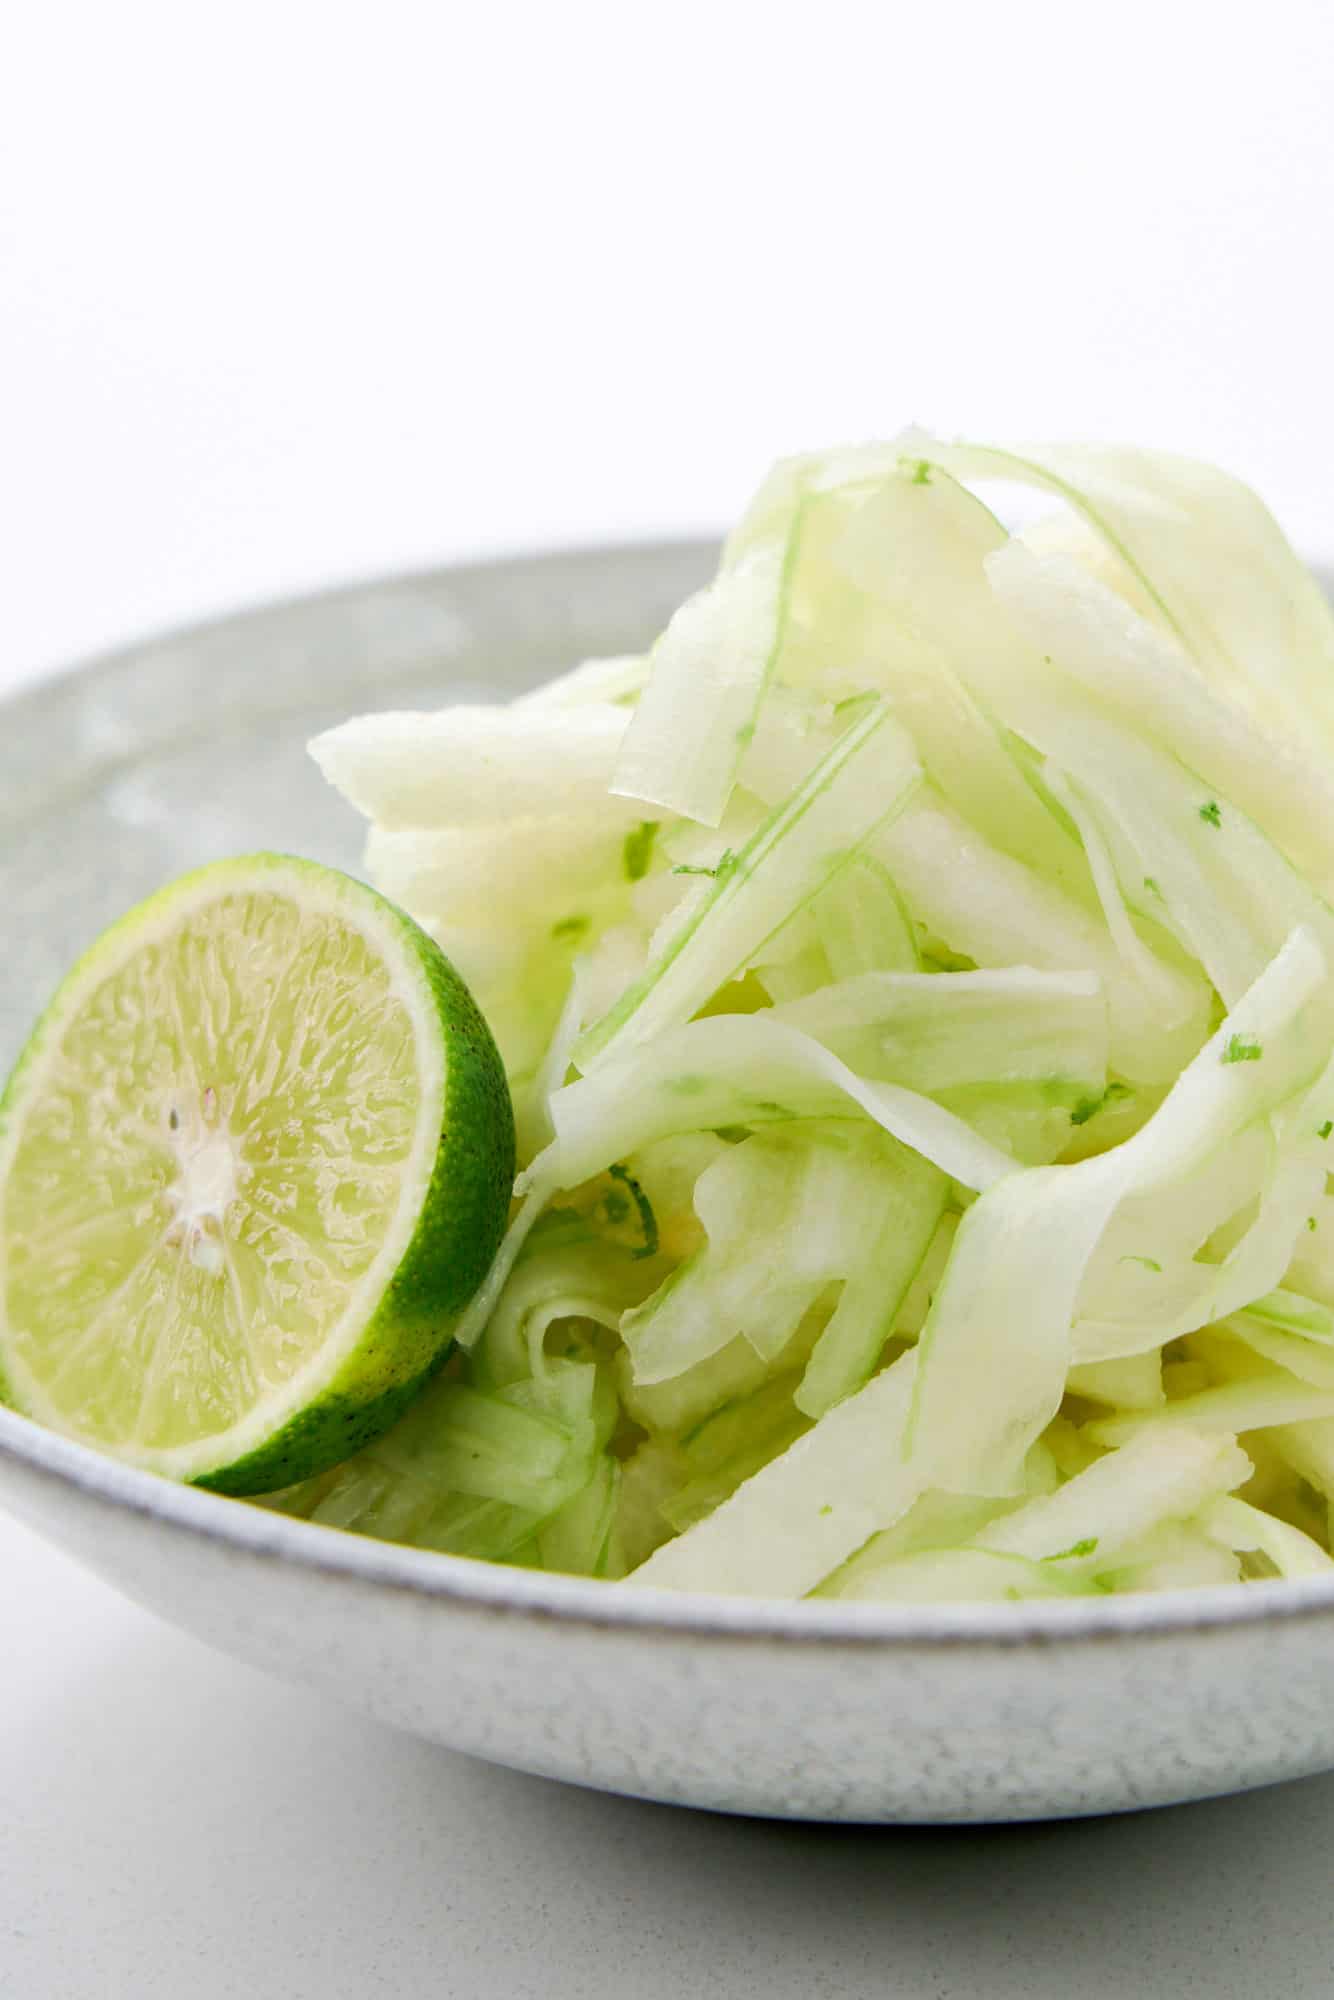 This delightfully light and refreshing autumn pear and celery salad is the perfect palate cleanser.